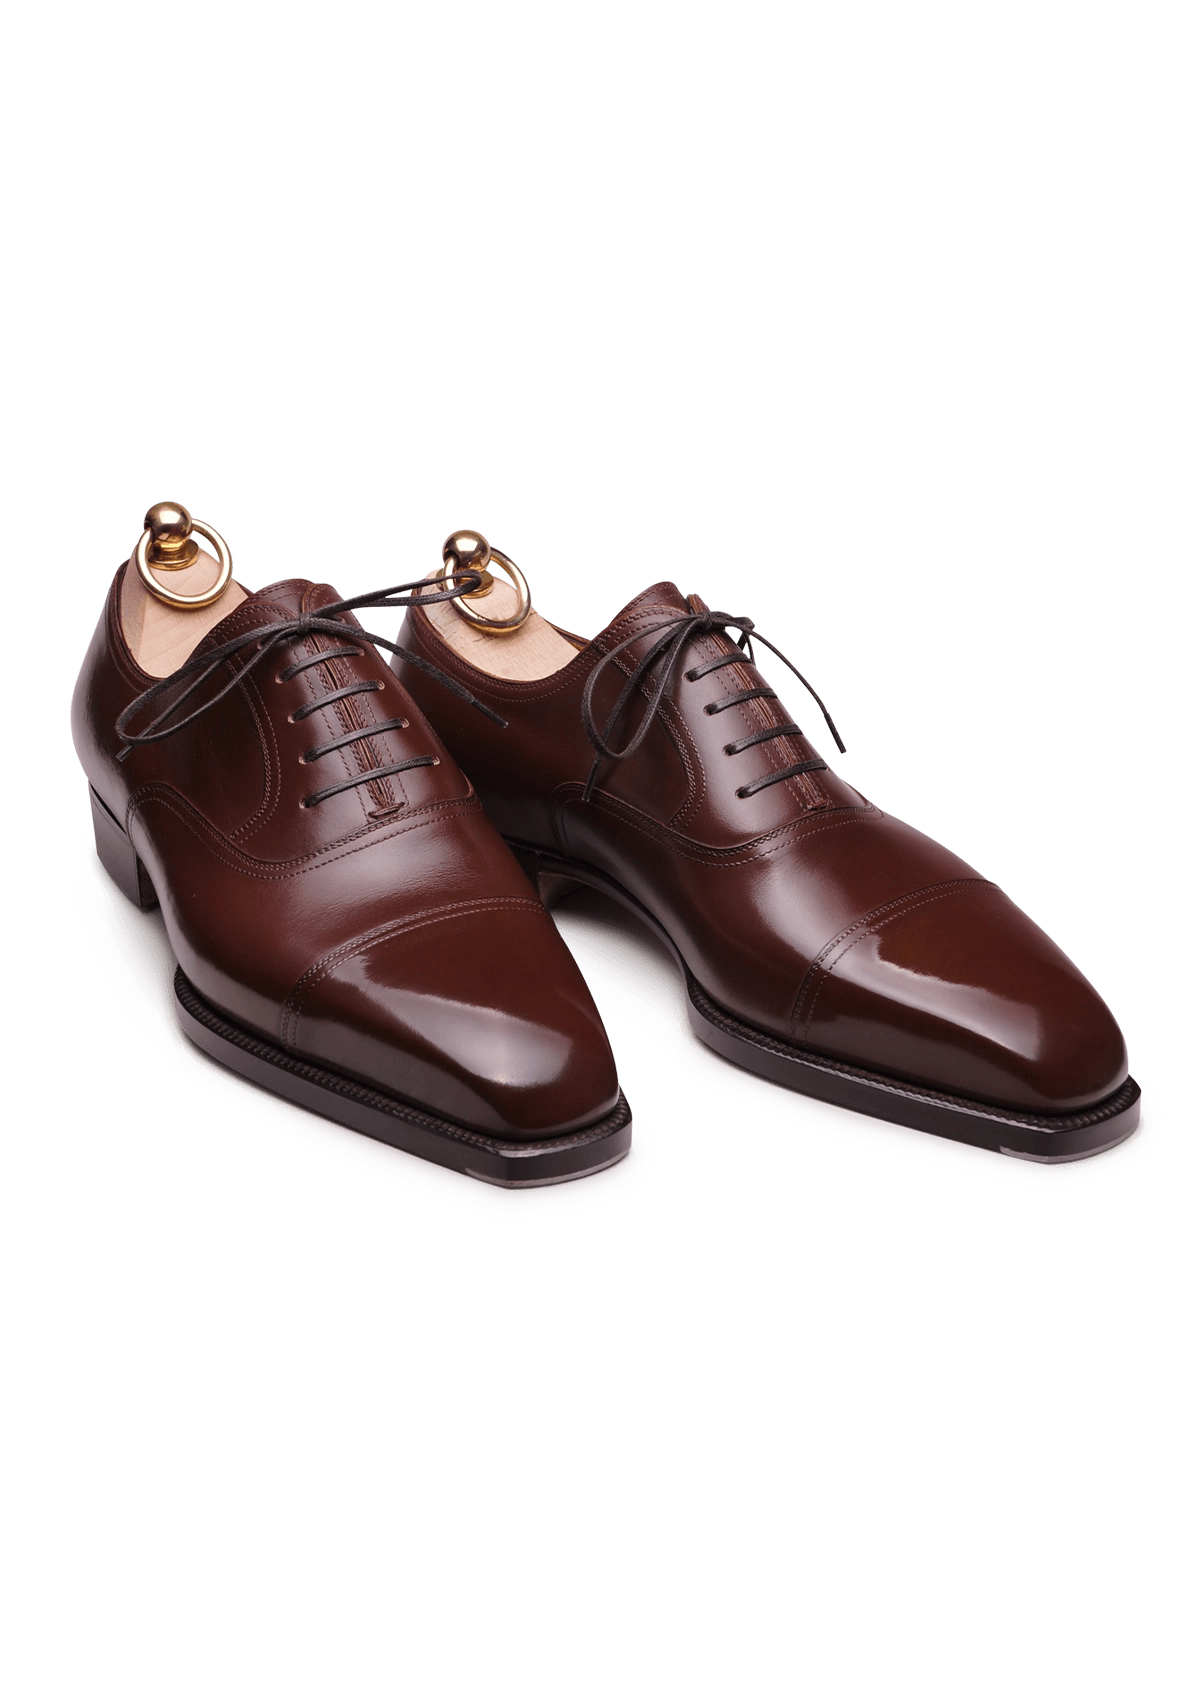 Brown Cap toe Oxford Shoes in French Box Calf | Stefano Bemer